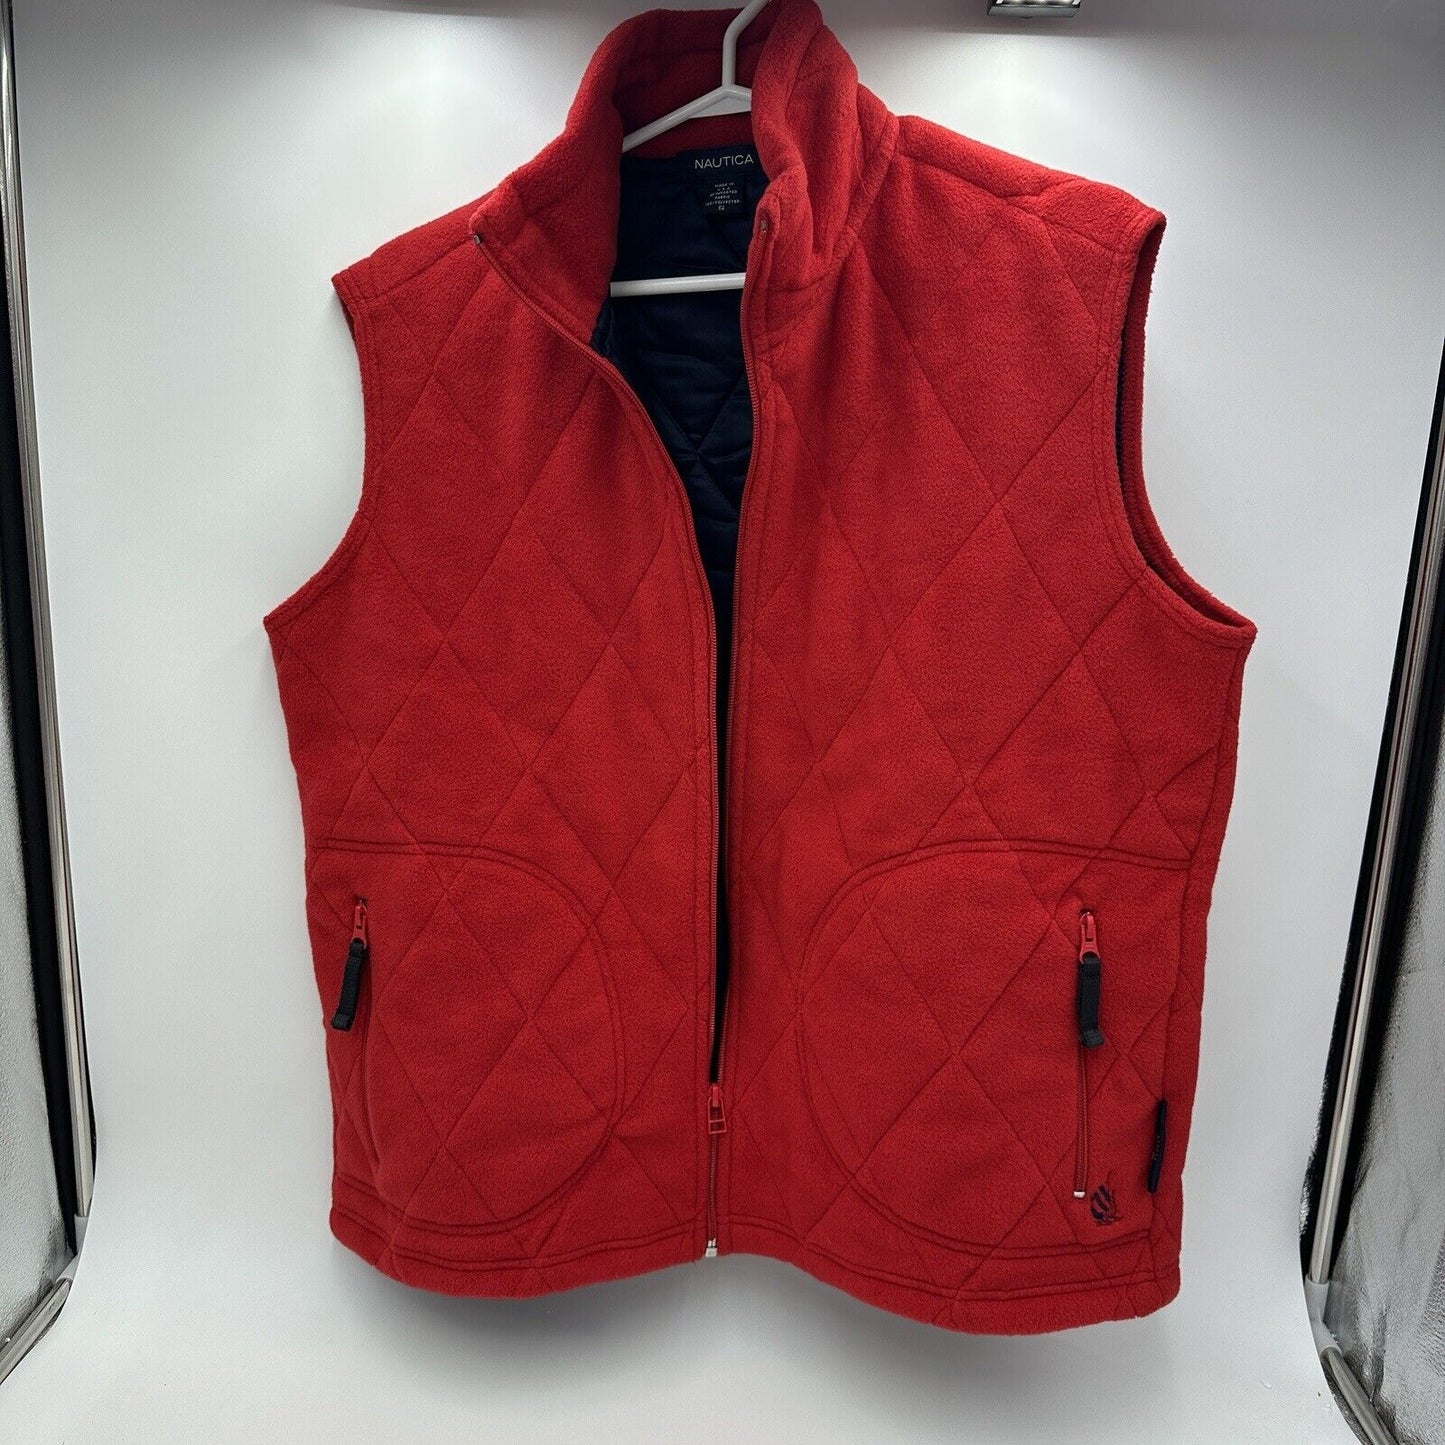 Nautica Nautech Women's Size S Vest Made in USA Regular Fit Fleece Red Quilted